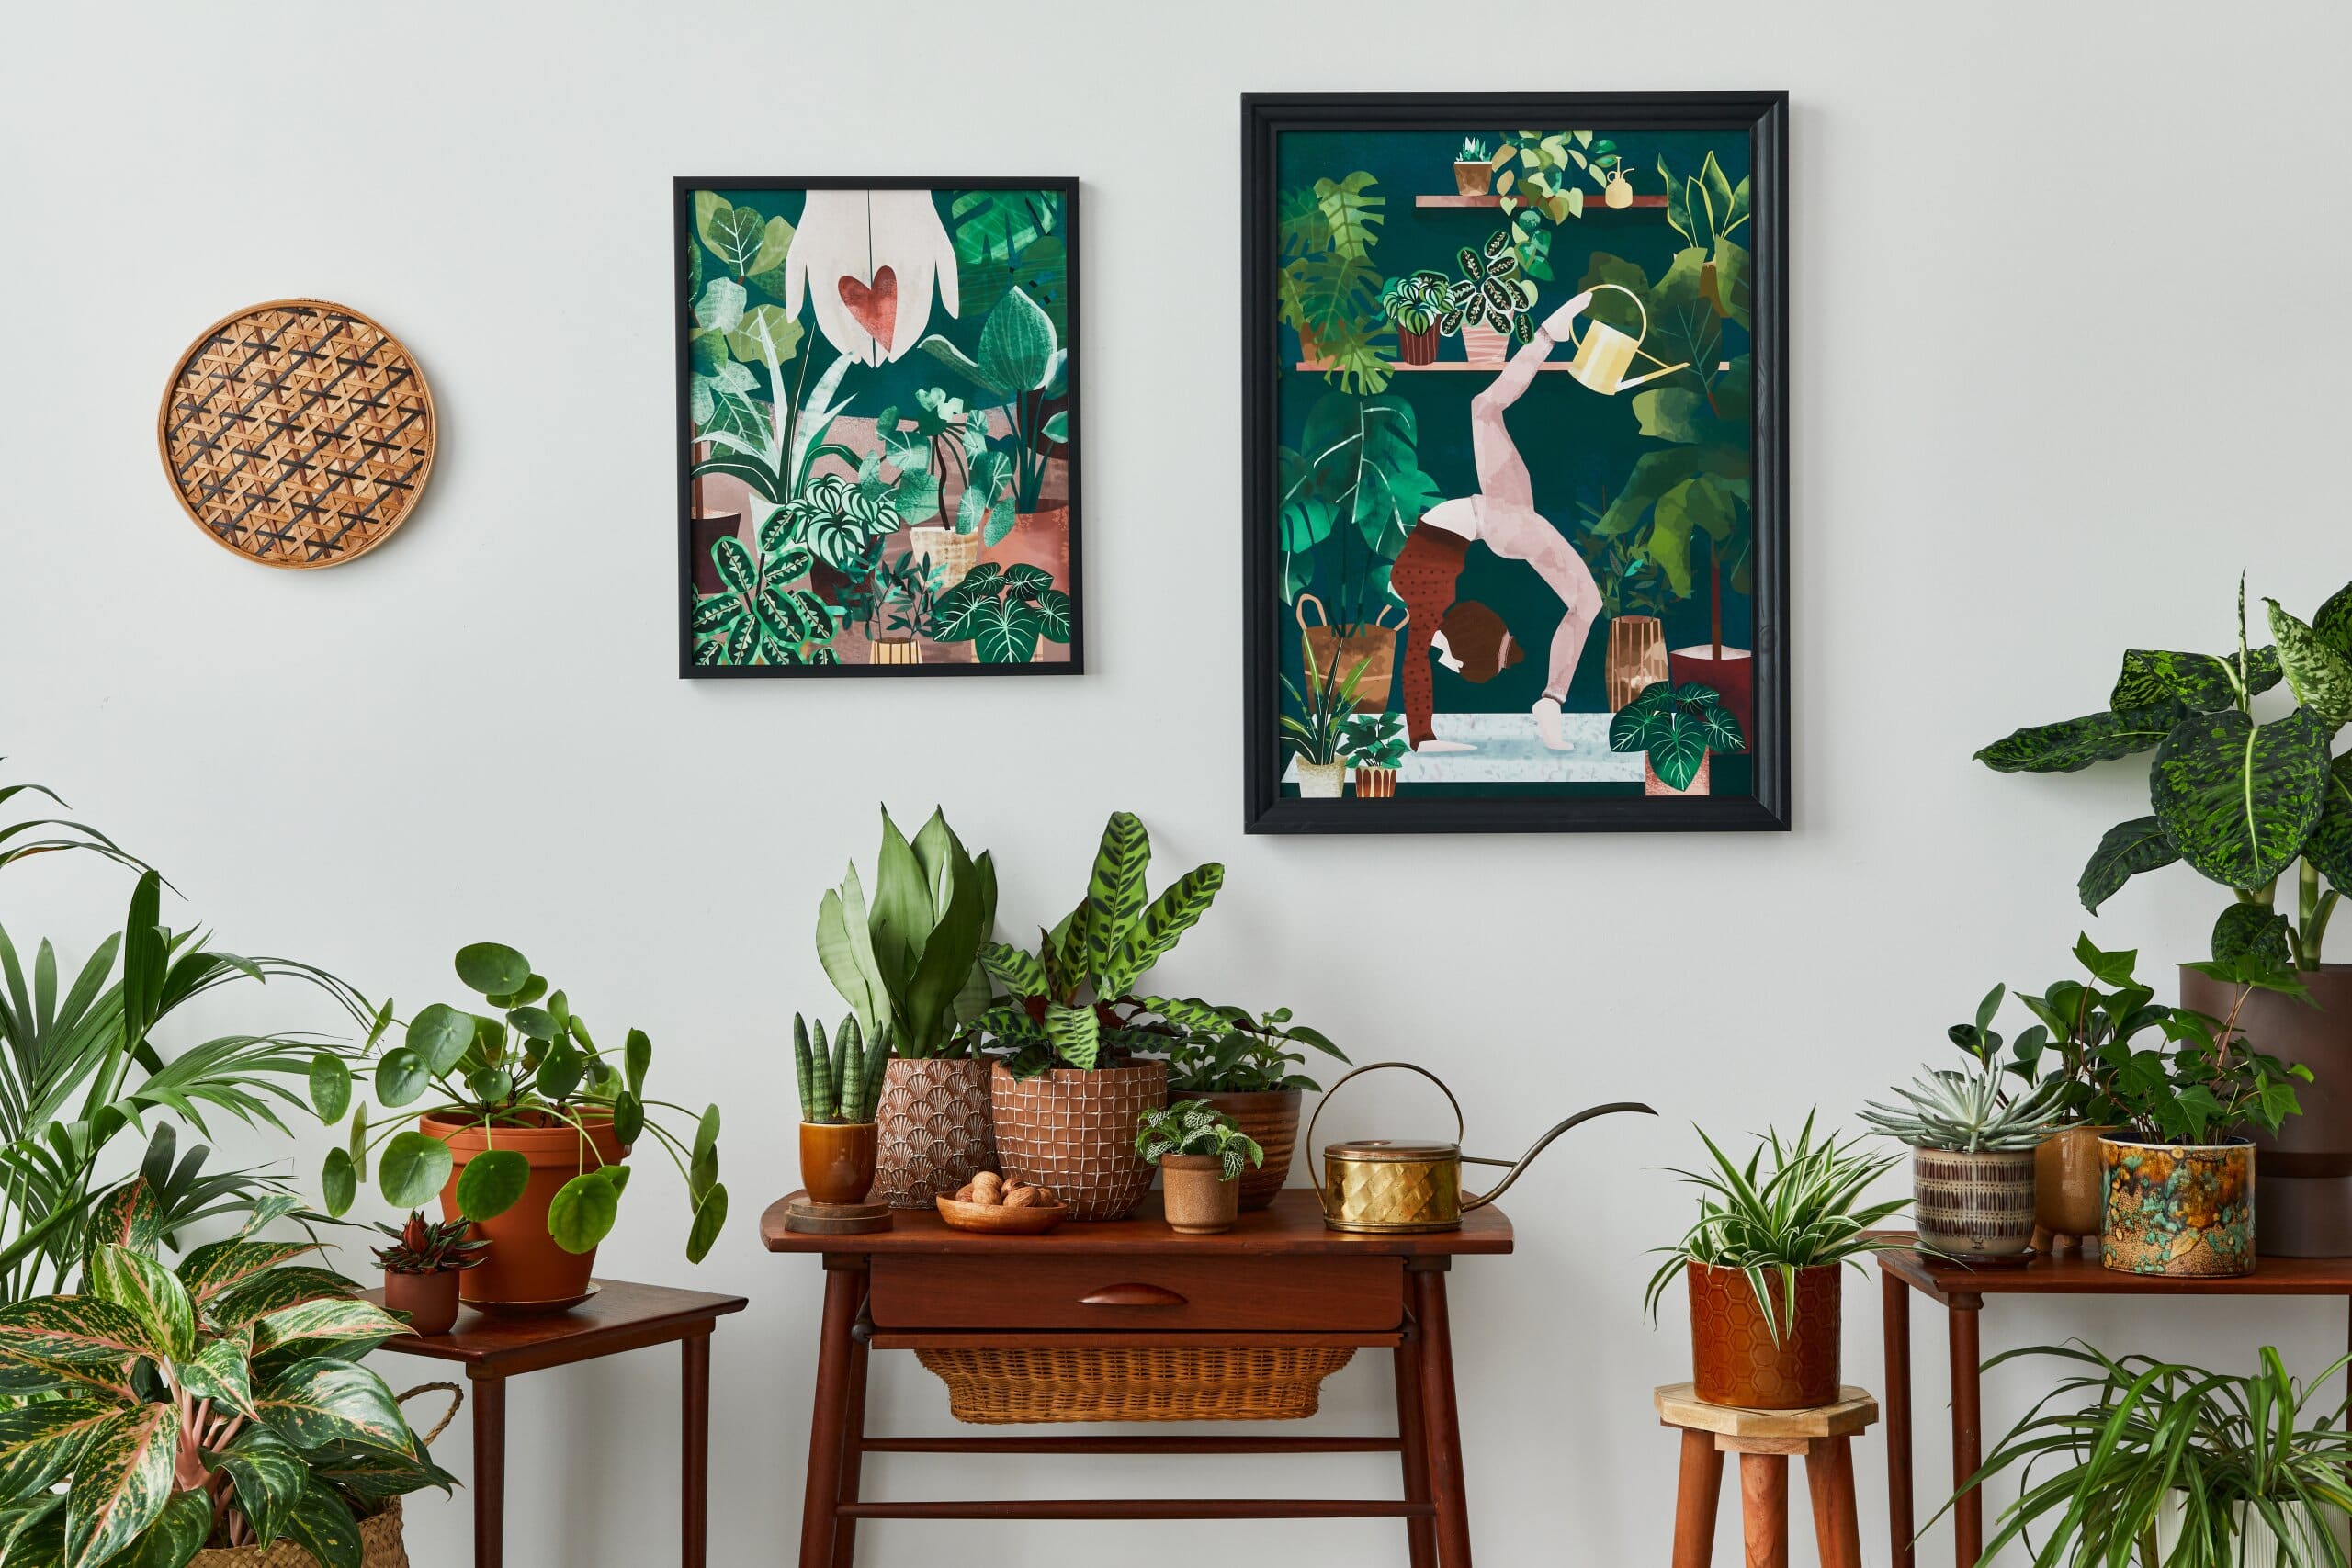 Image of a home interior with lots of houseplants and some prints on the wall in a maximalist style.